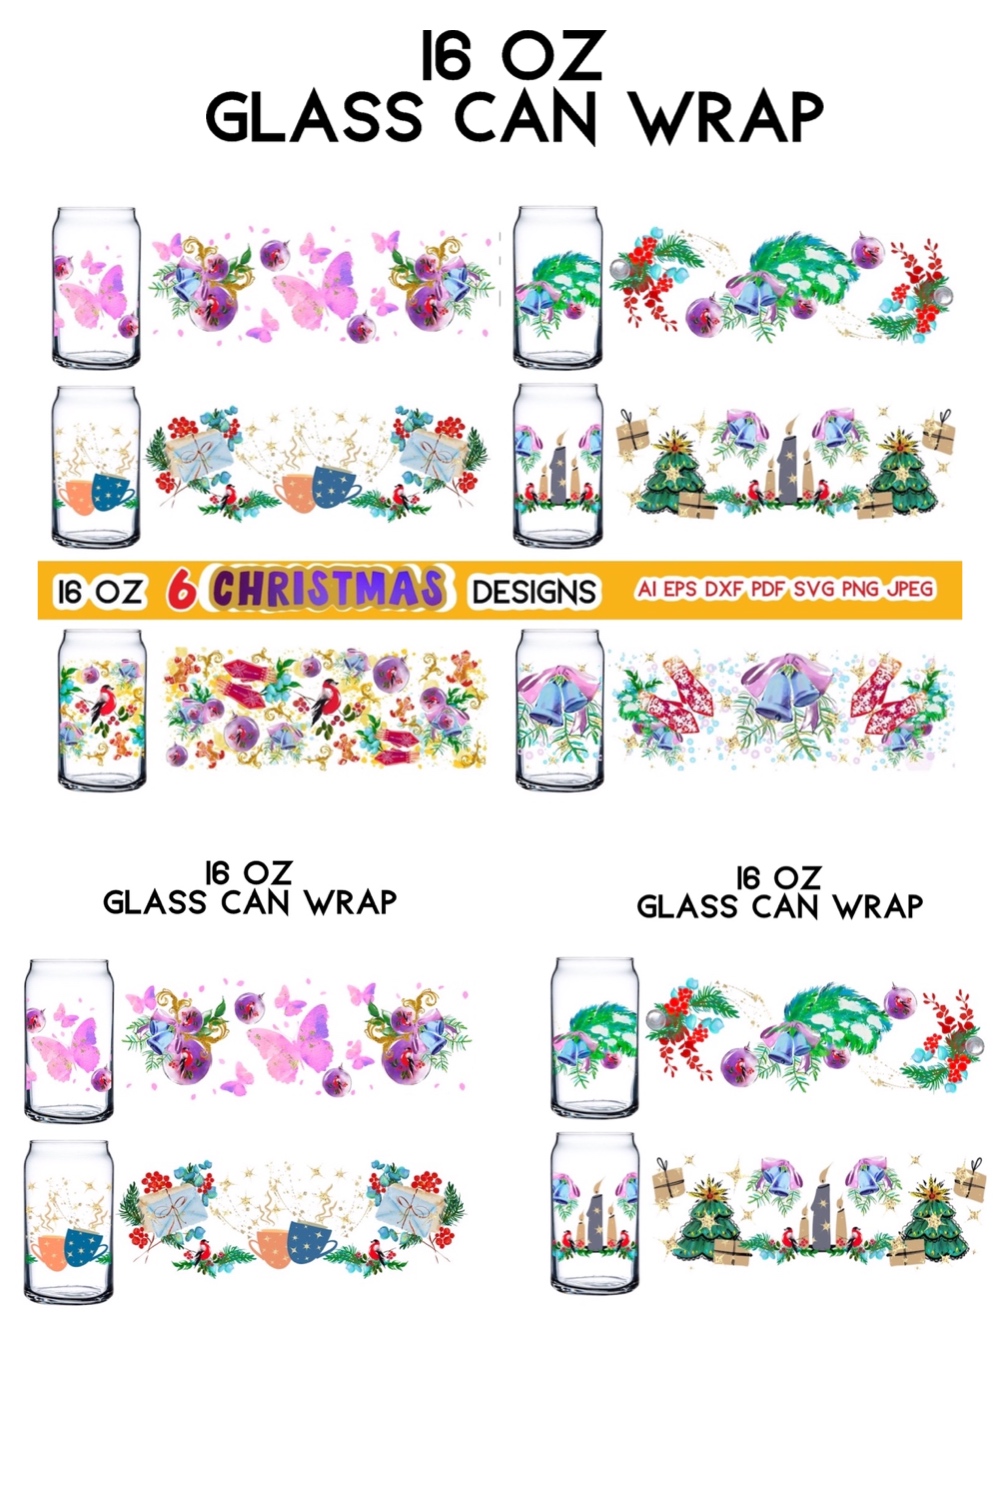 Glass Can Wrap Holiday Patterns Design pinterest image.